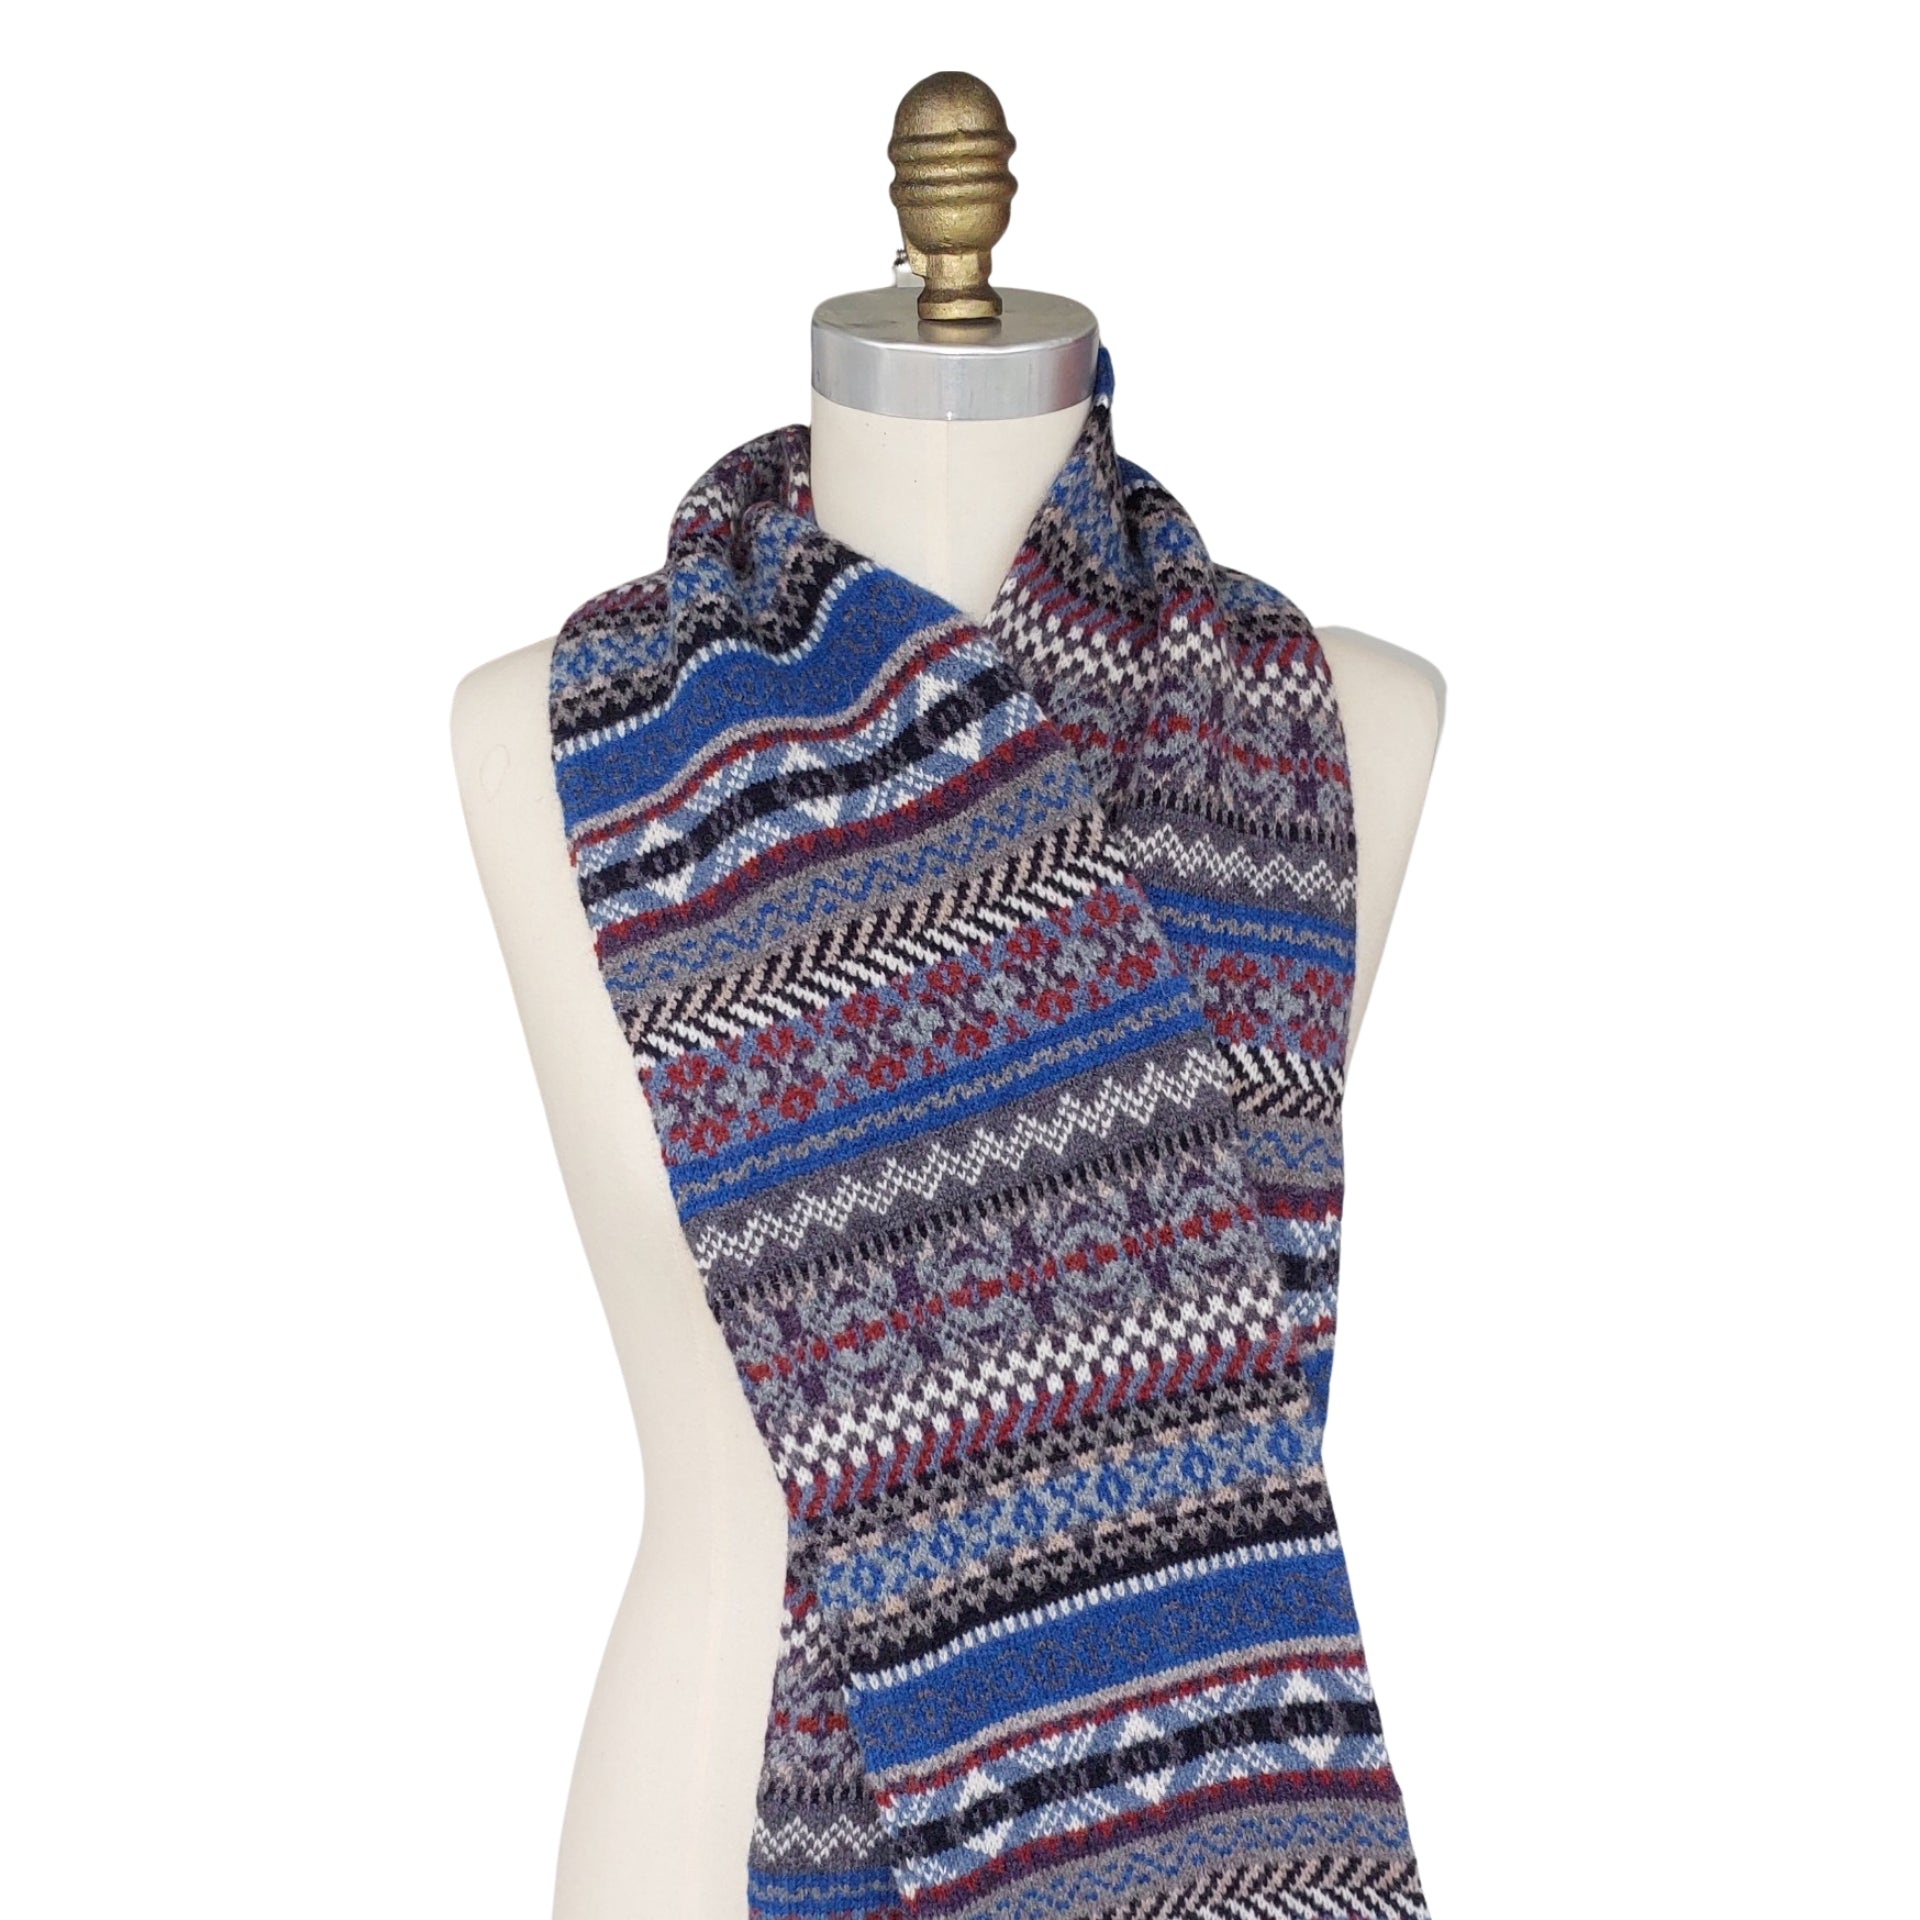 Mr Wool Lochinver Patterned Scarf